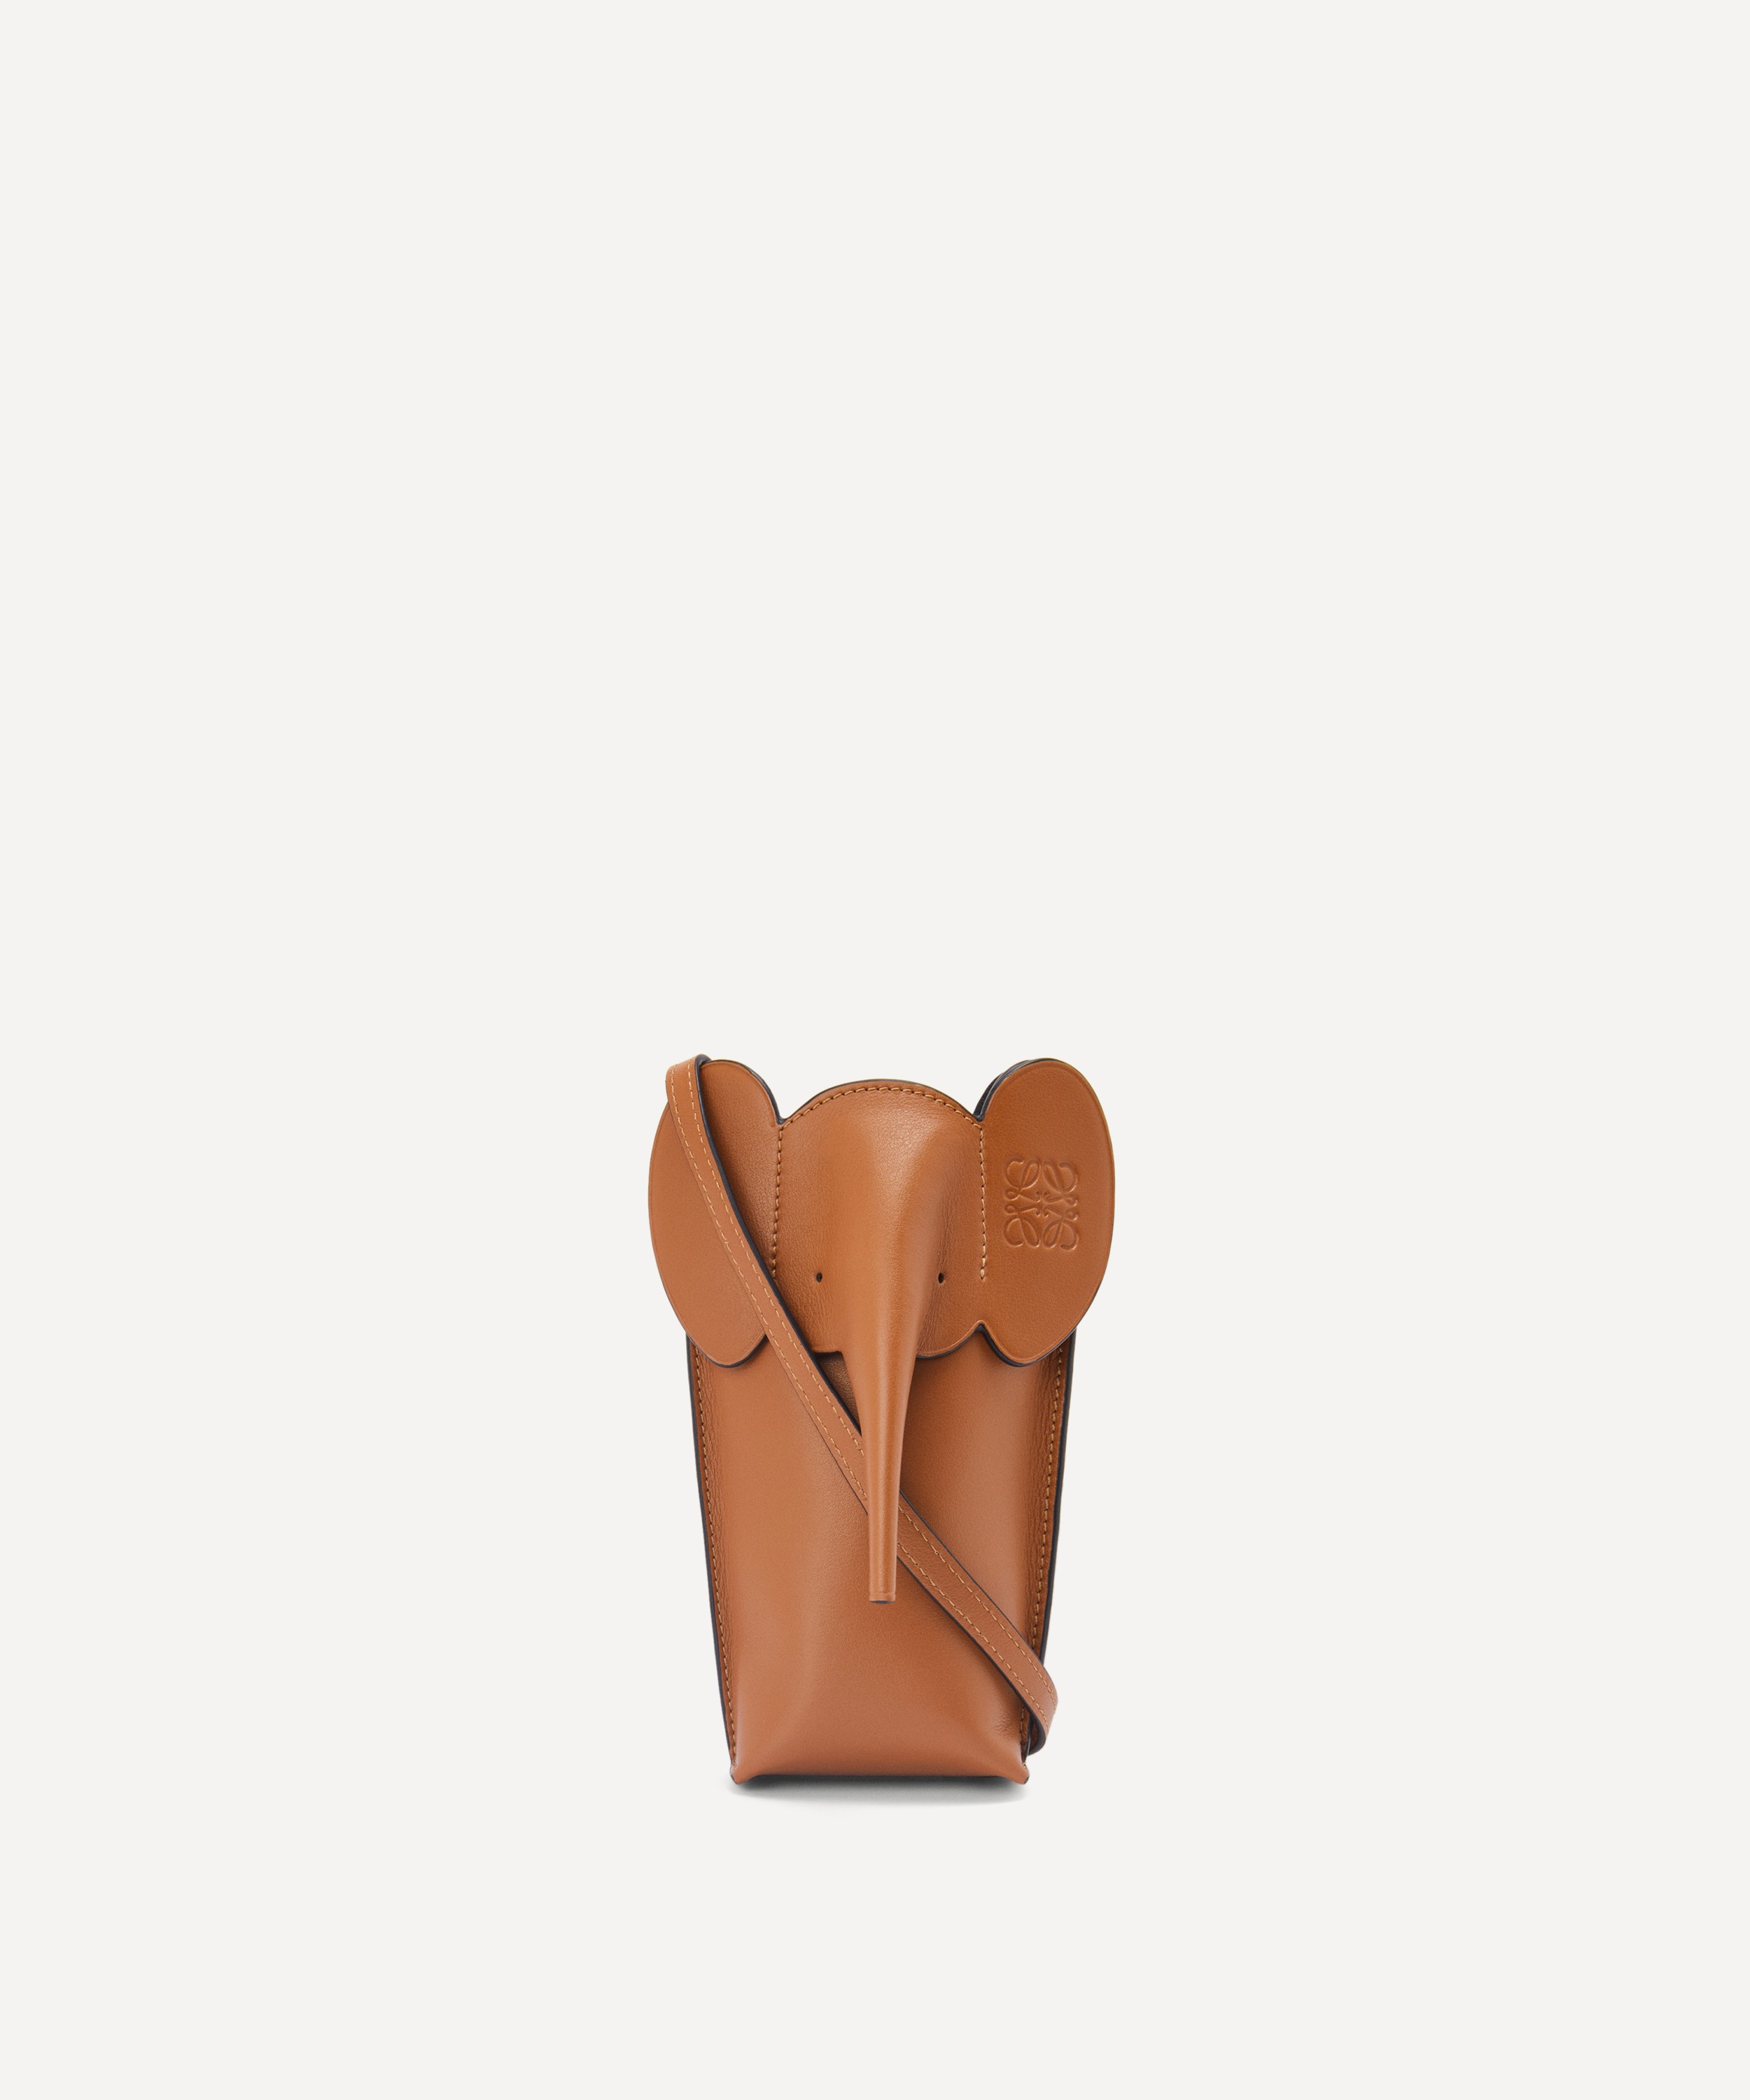 Loewe - Elephant Pocket Leather Cross-Body Pouch image number 0